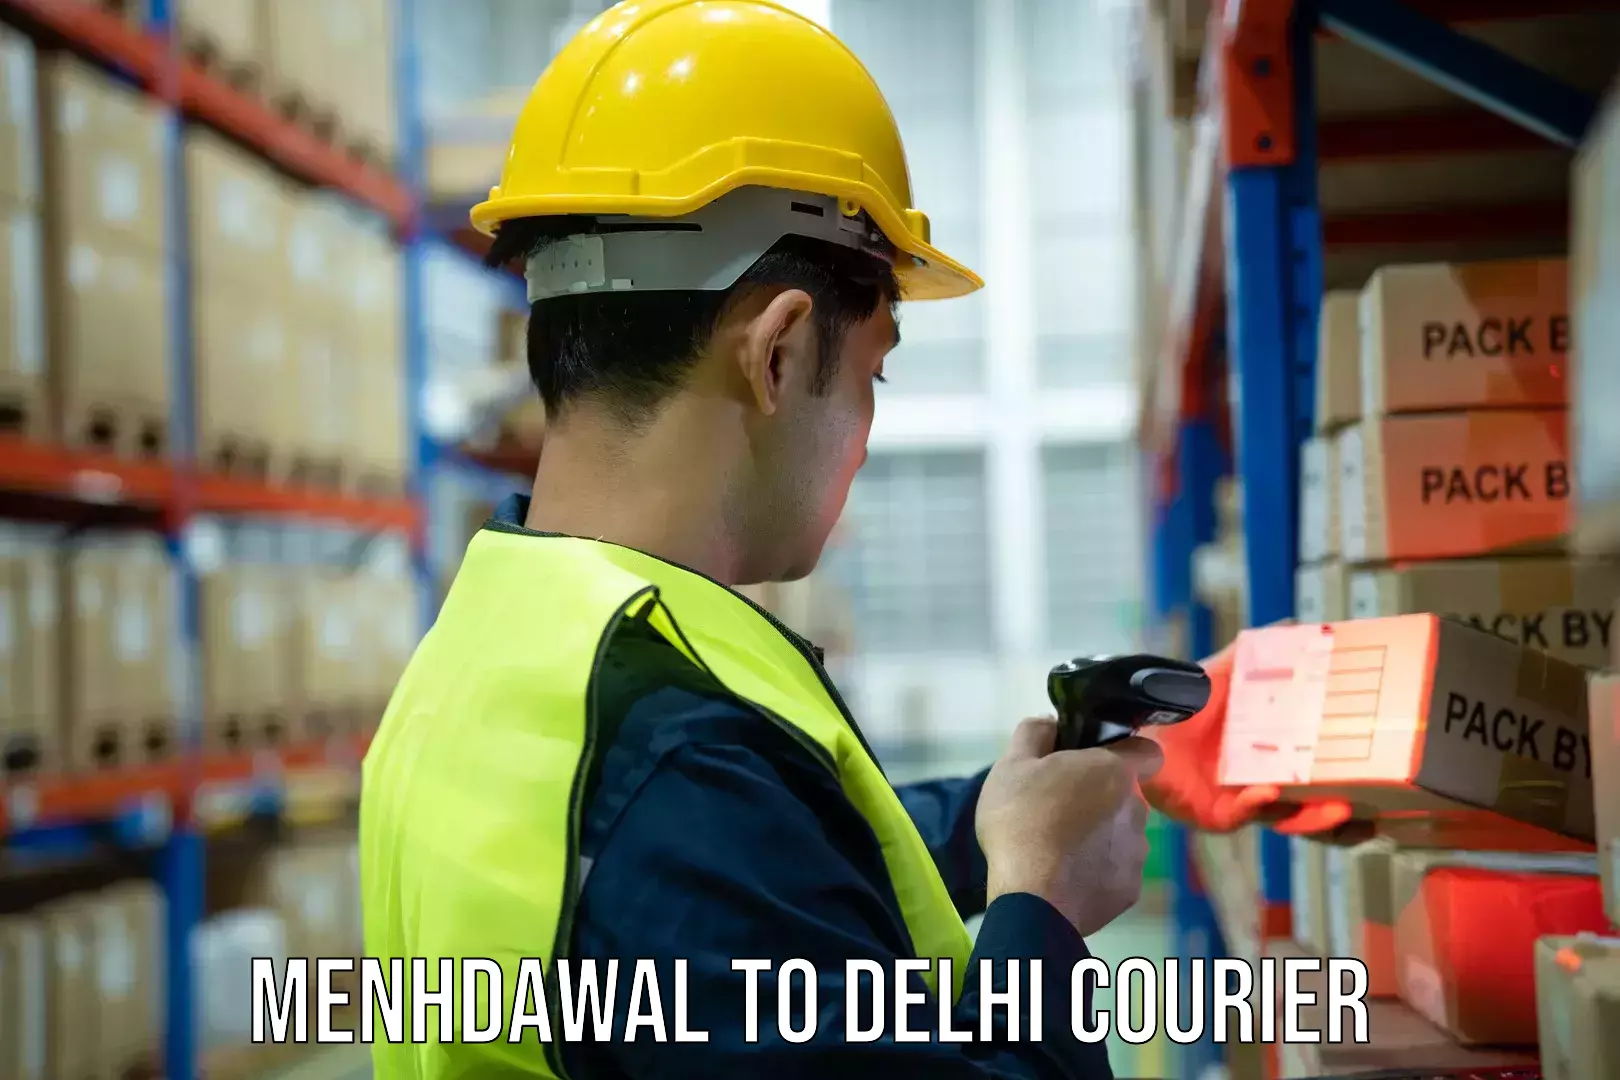 Rapid shipping services Menhdawal to Sansad Marg